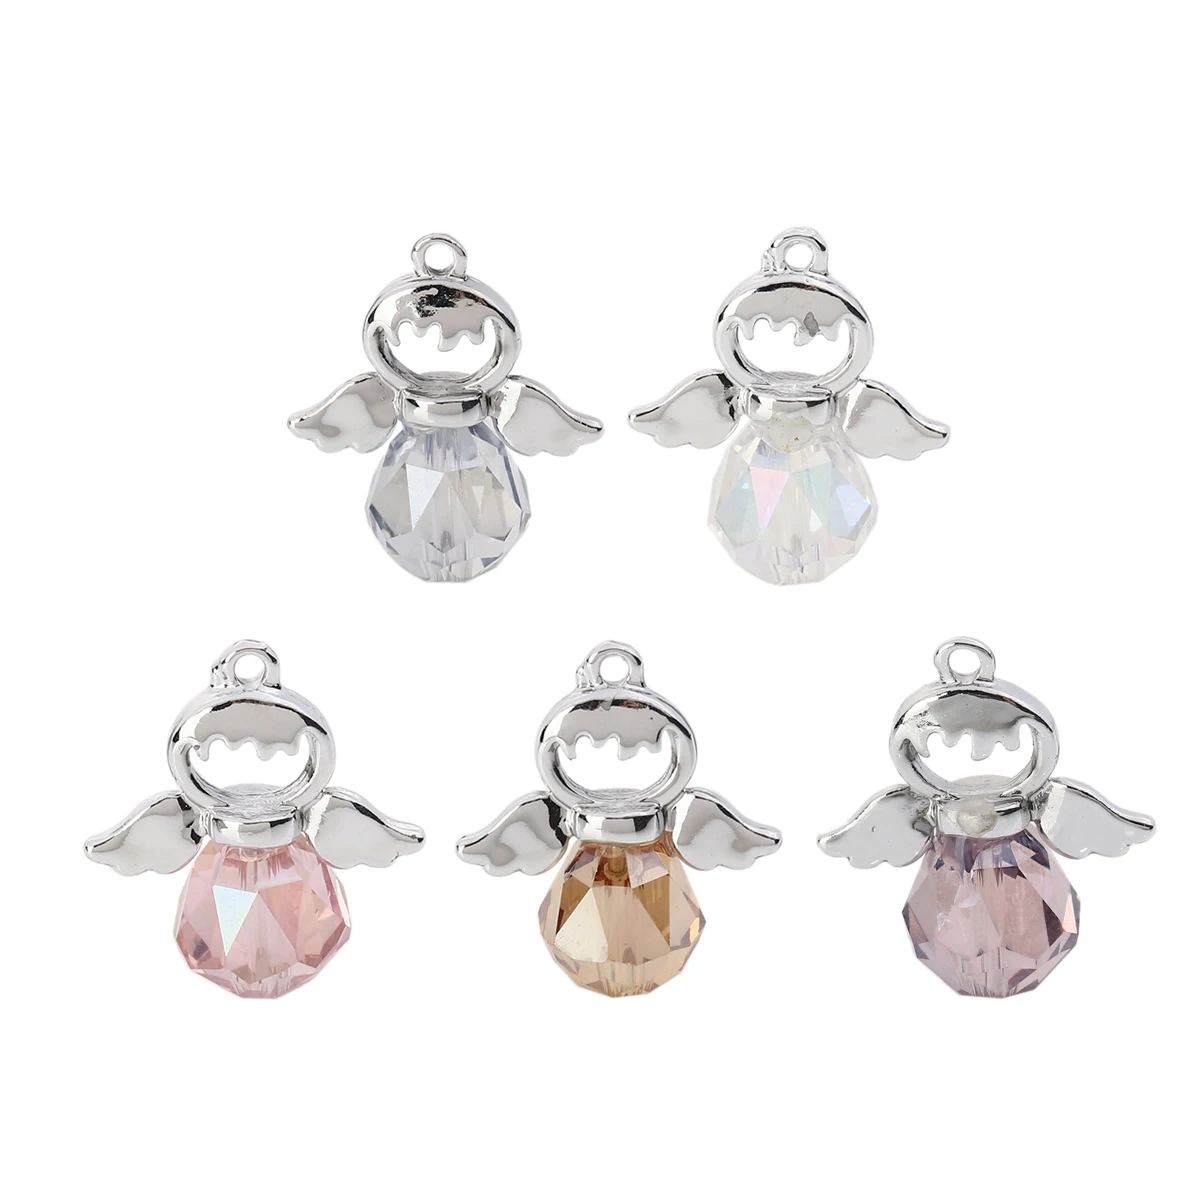 Zinc Based Alloy Faceted Glass Angel Charms Silver Color Faceted 21mm( 7/8") x 19mm( 6/8") For DIY Jewelry Making, 5 PCs